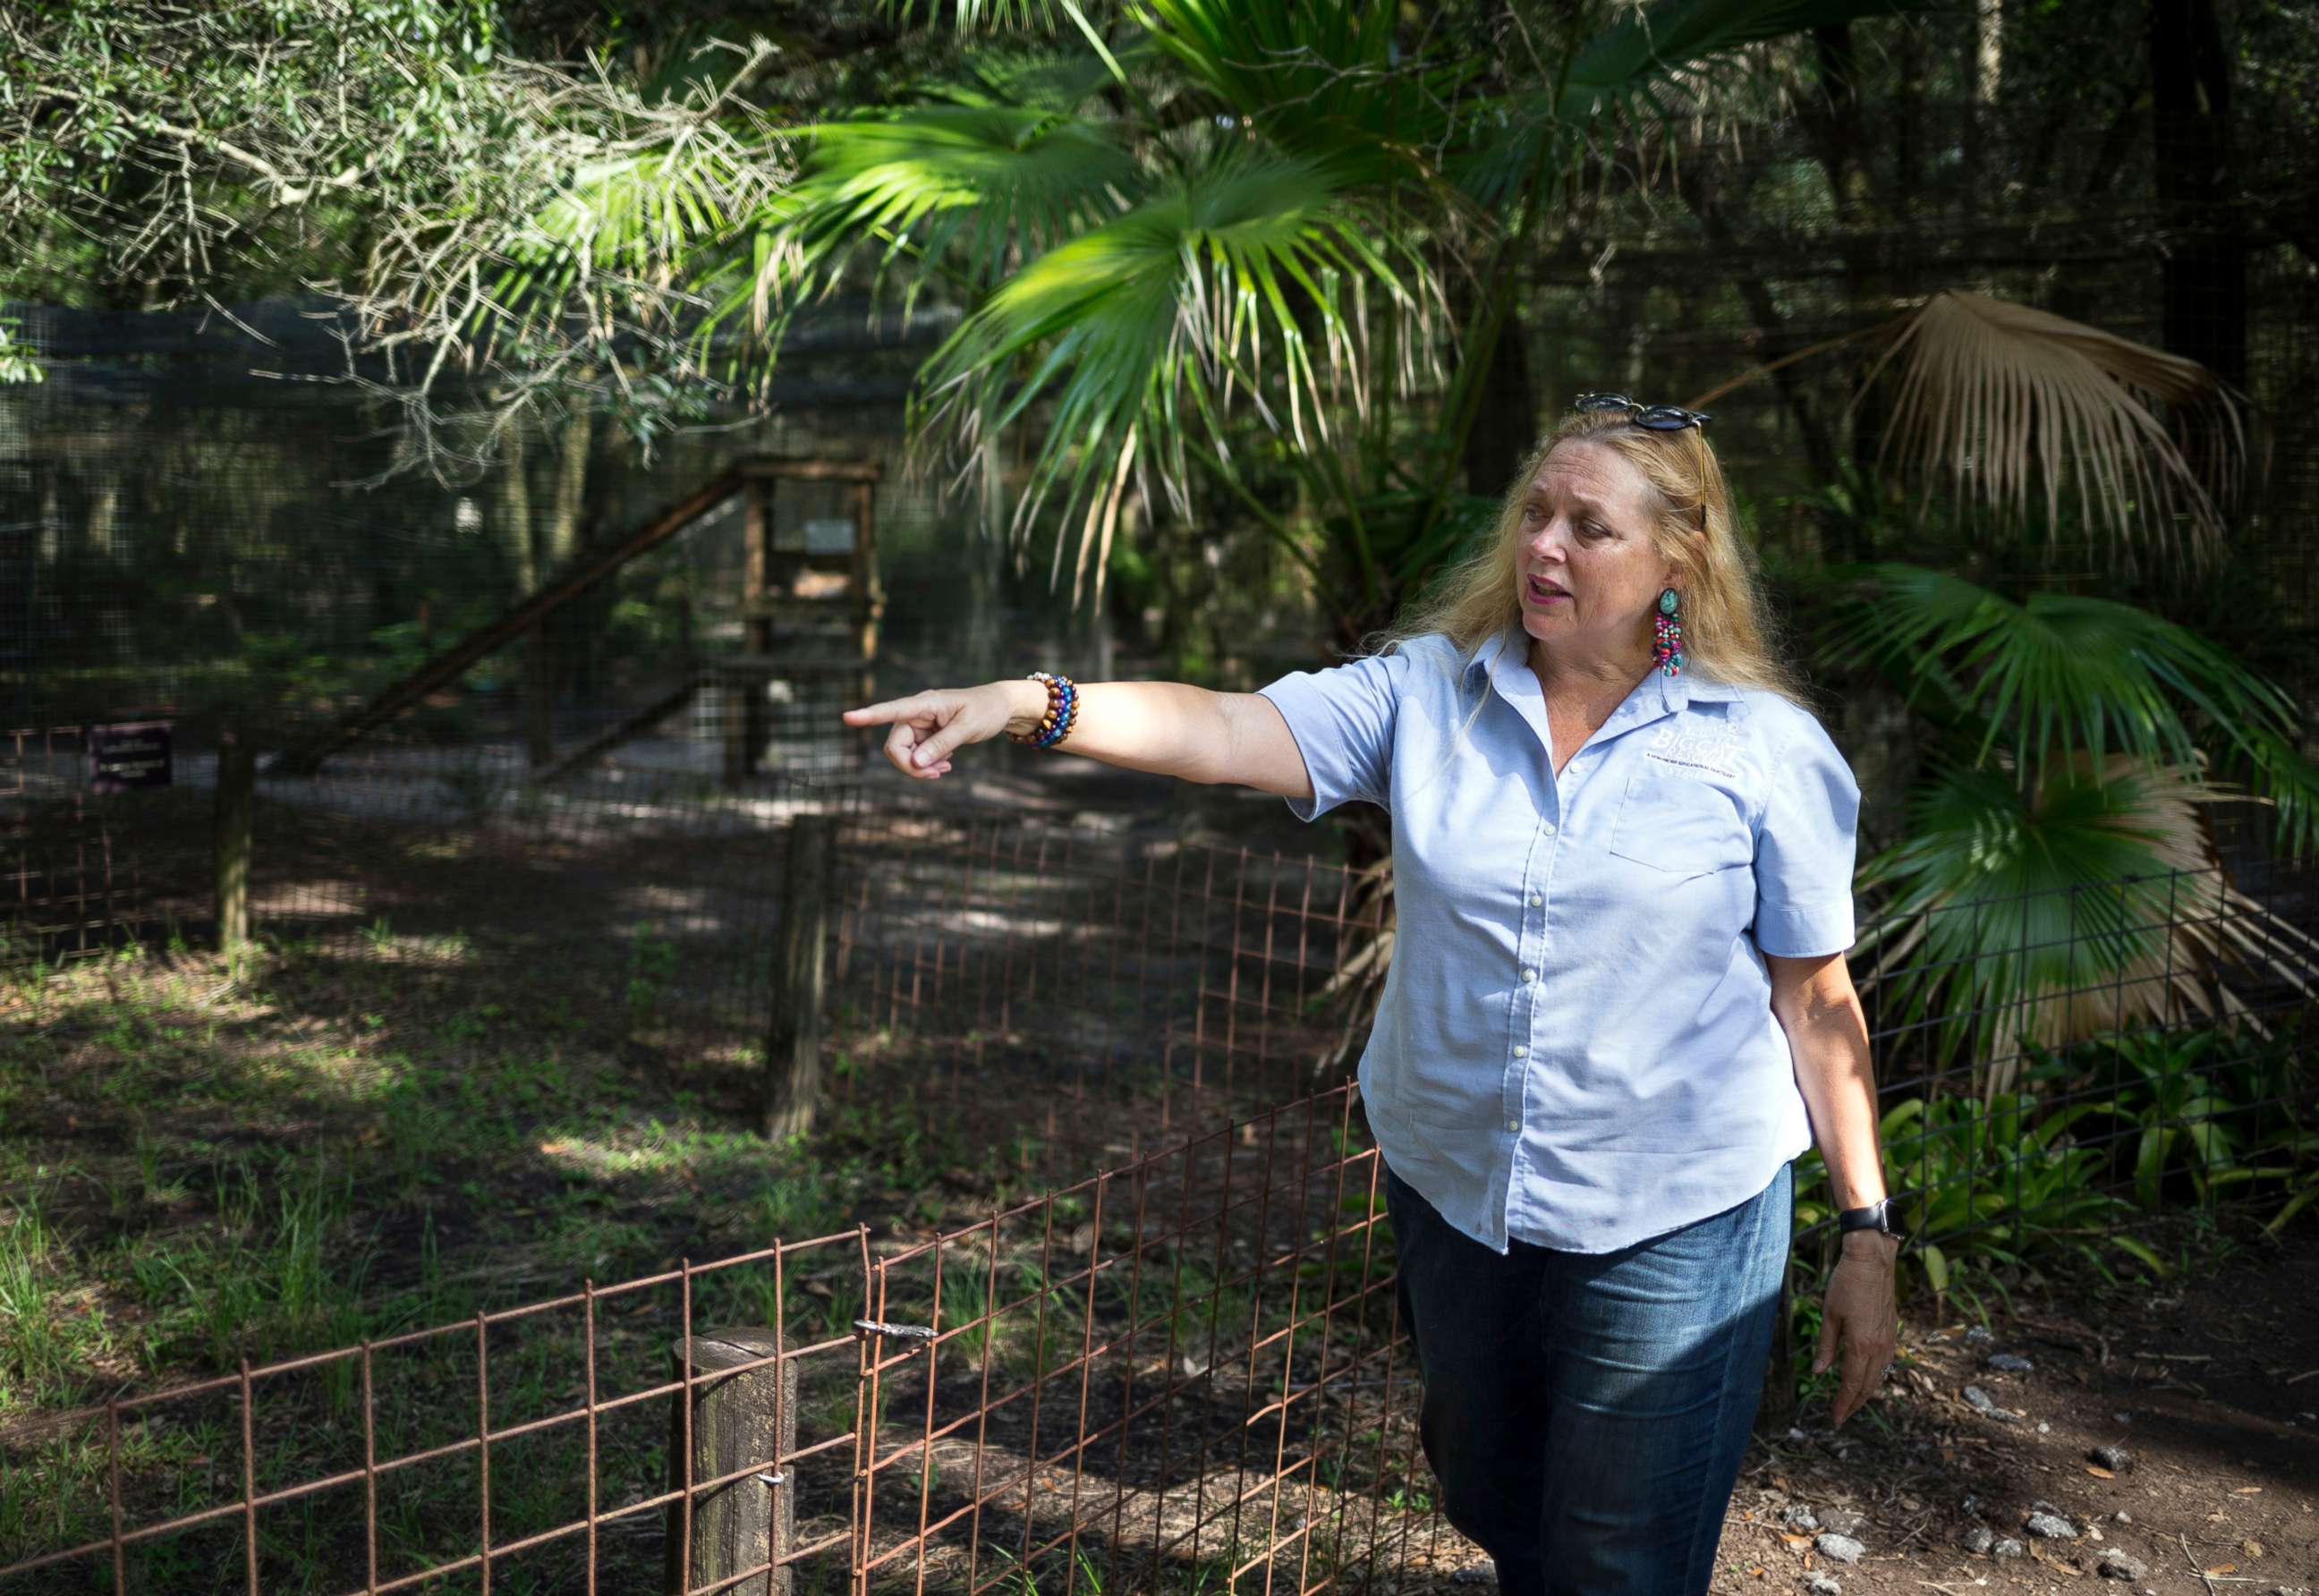 PHOTO: In this July 20, 2017, file photo, Carole Baskin, founder of Big Cat Rescue, walks the property near Tampa, Fla.